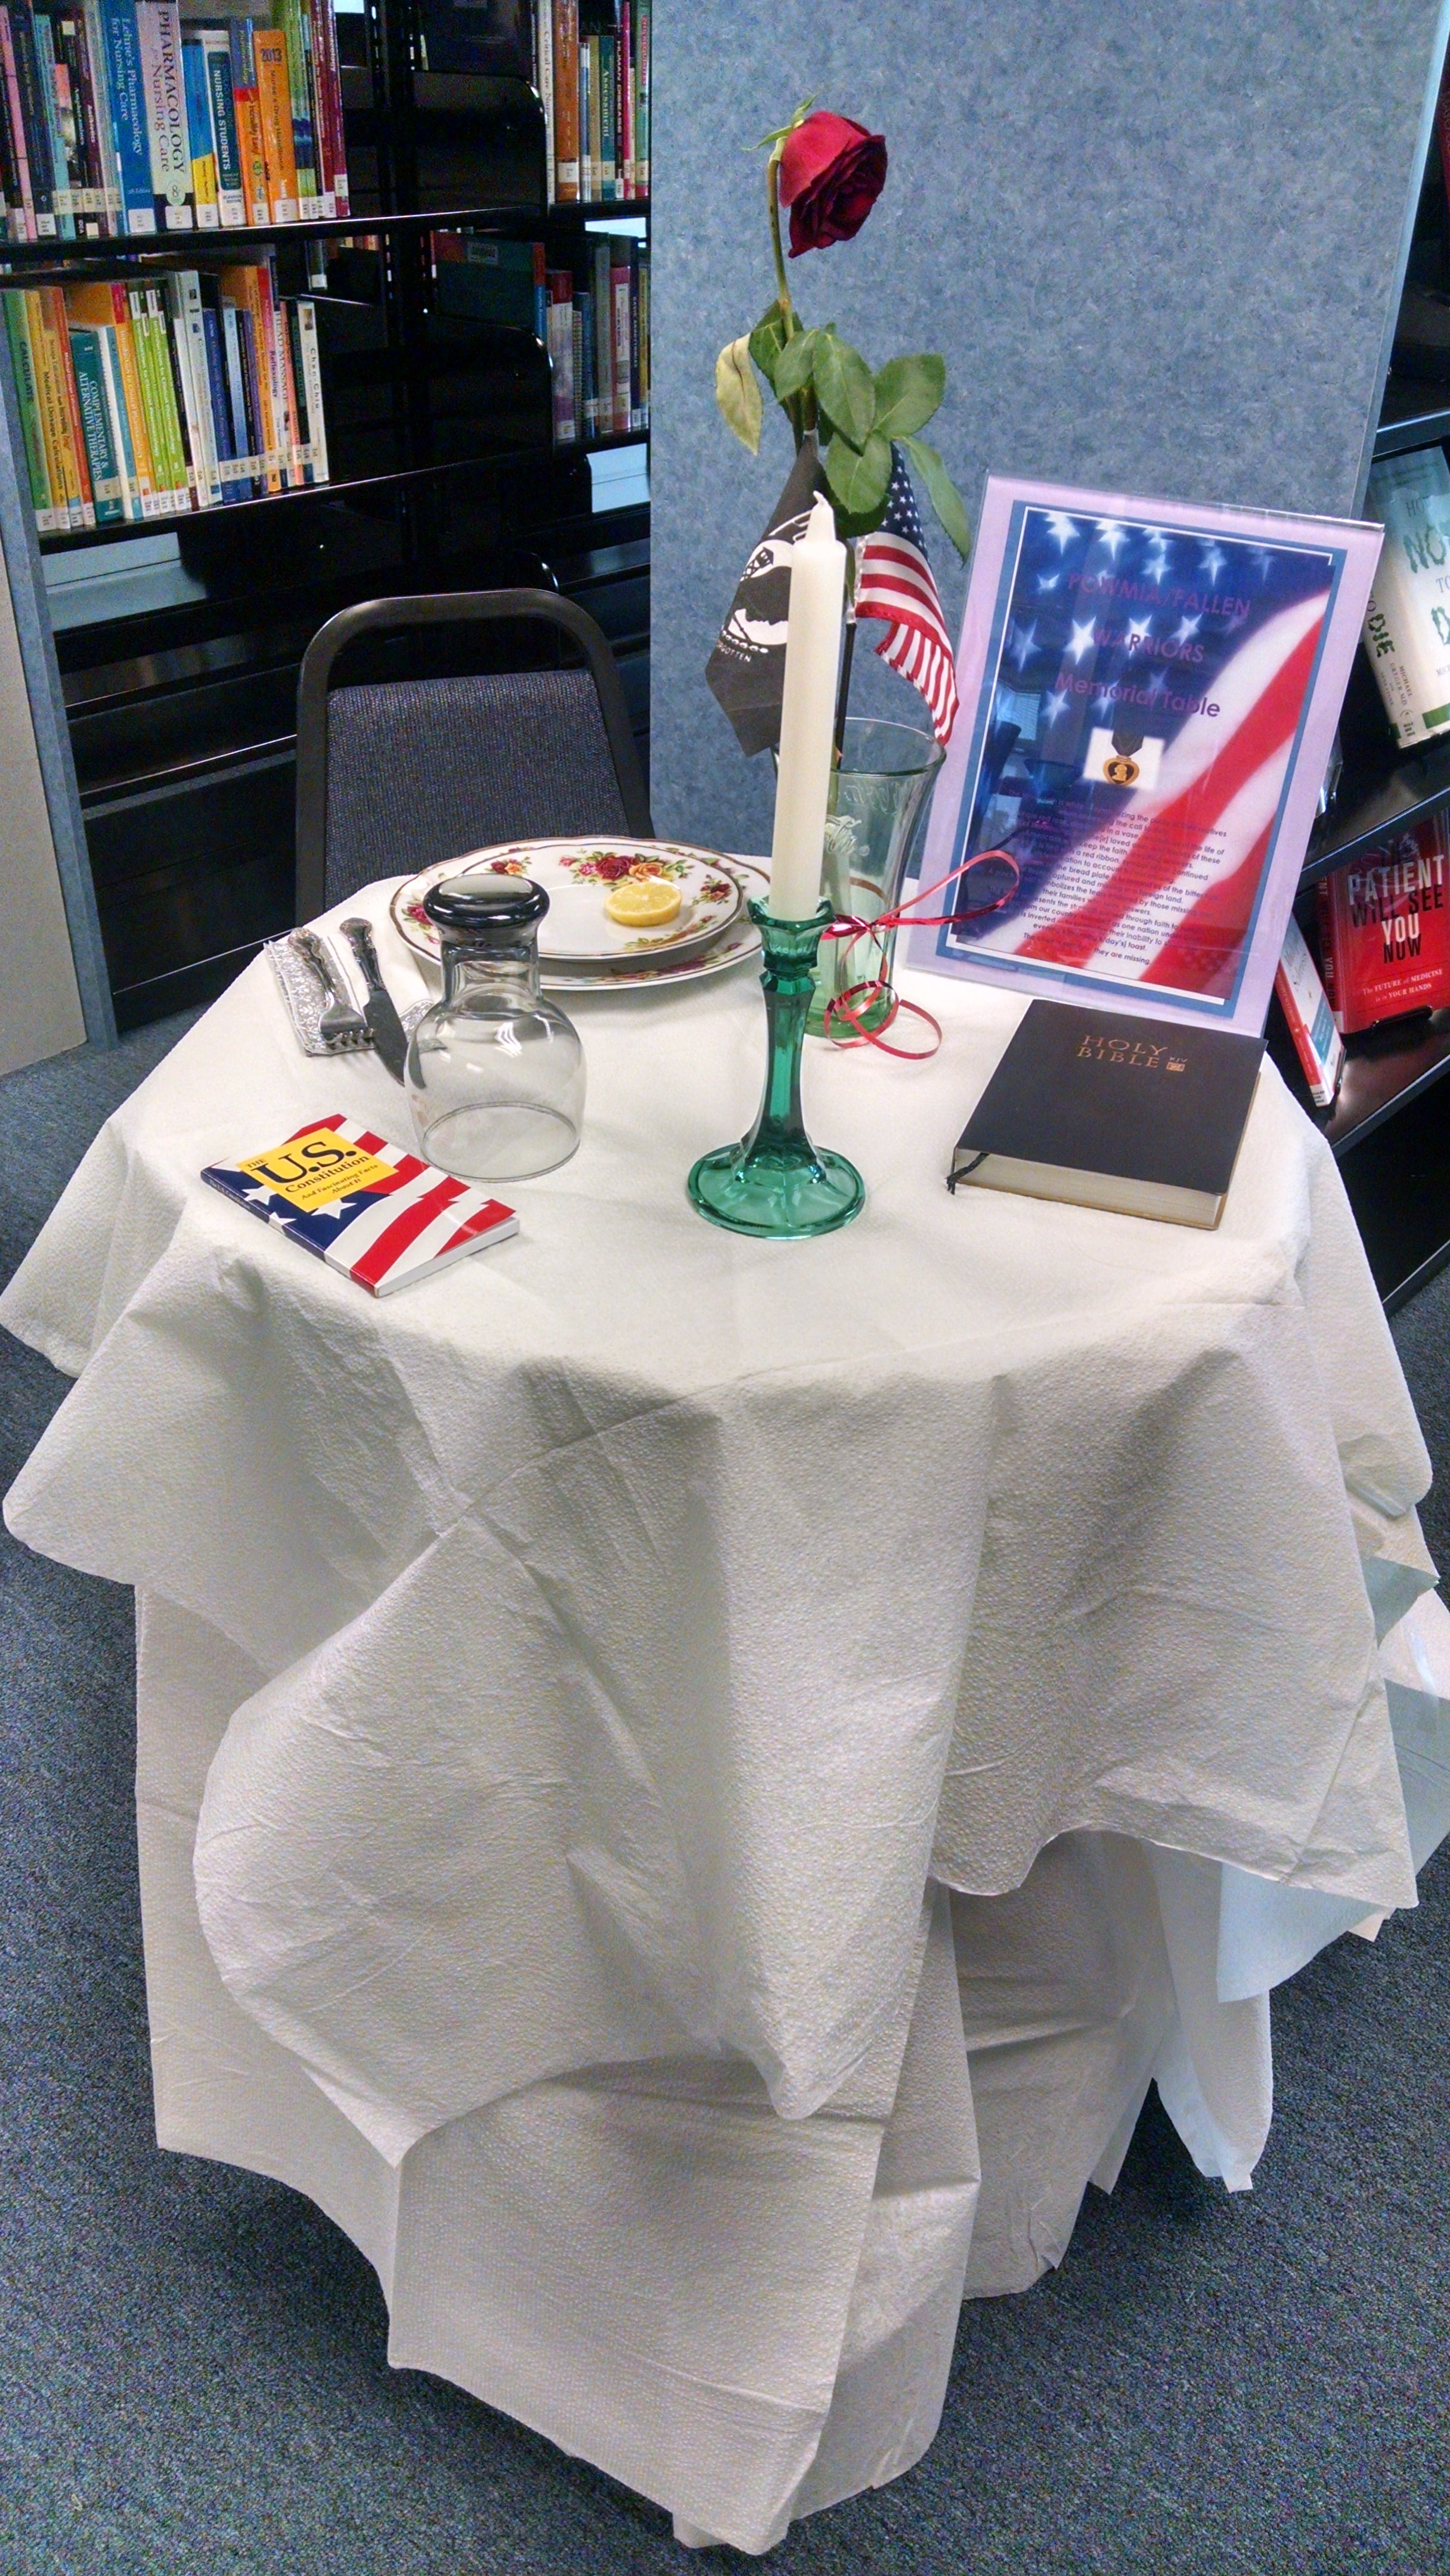 Clearwater Campus Honors the Military with the “Missing Man Table